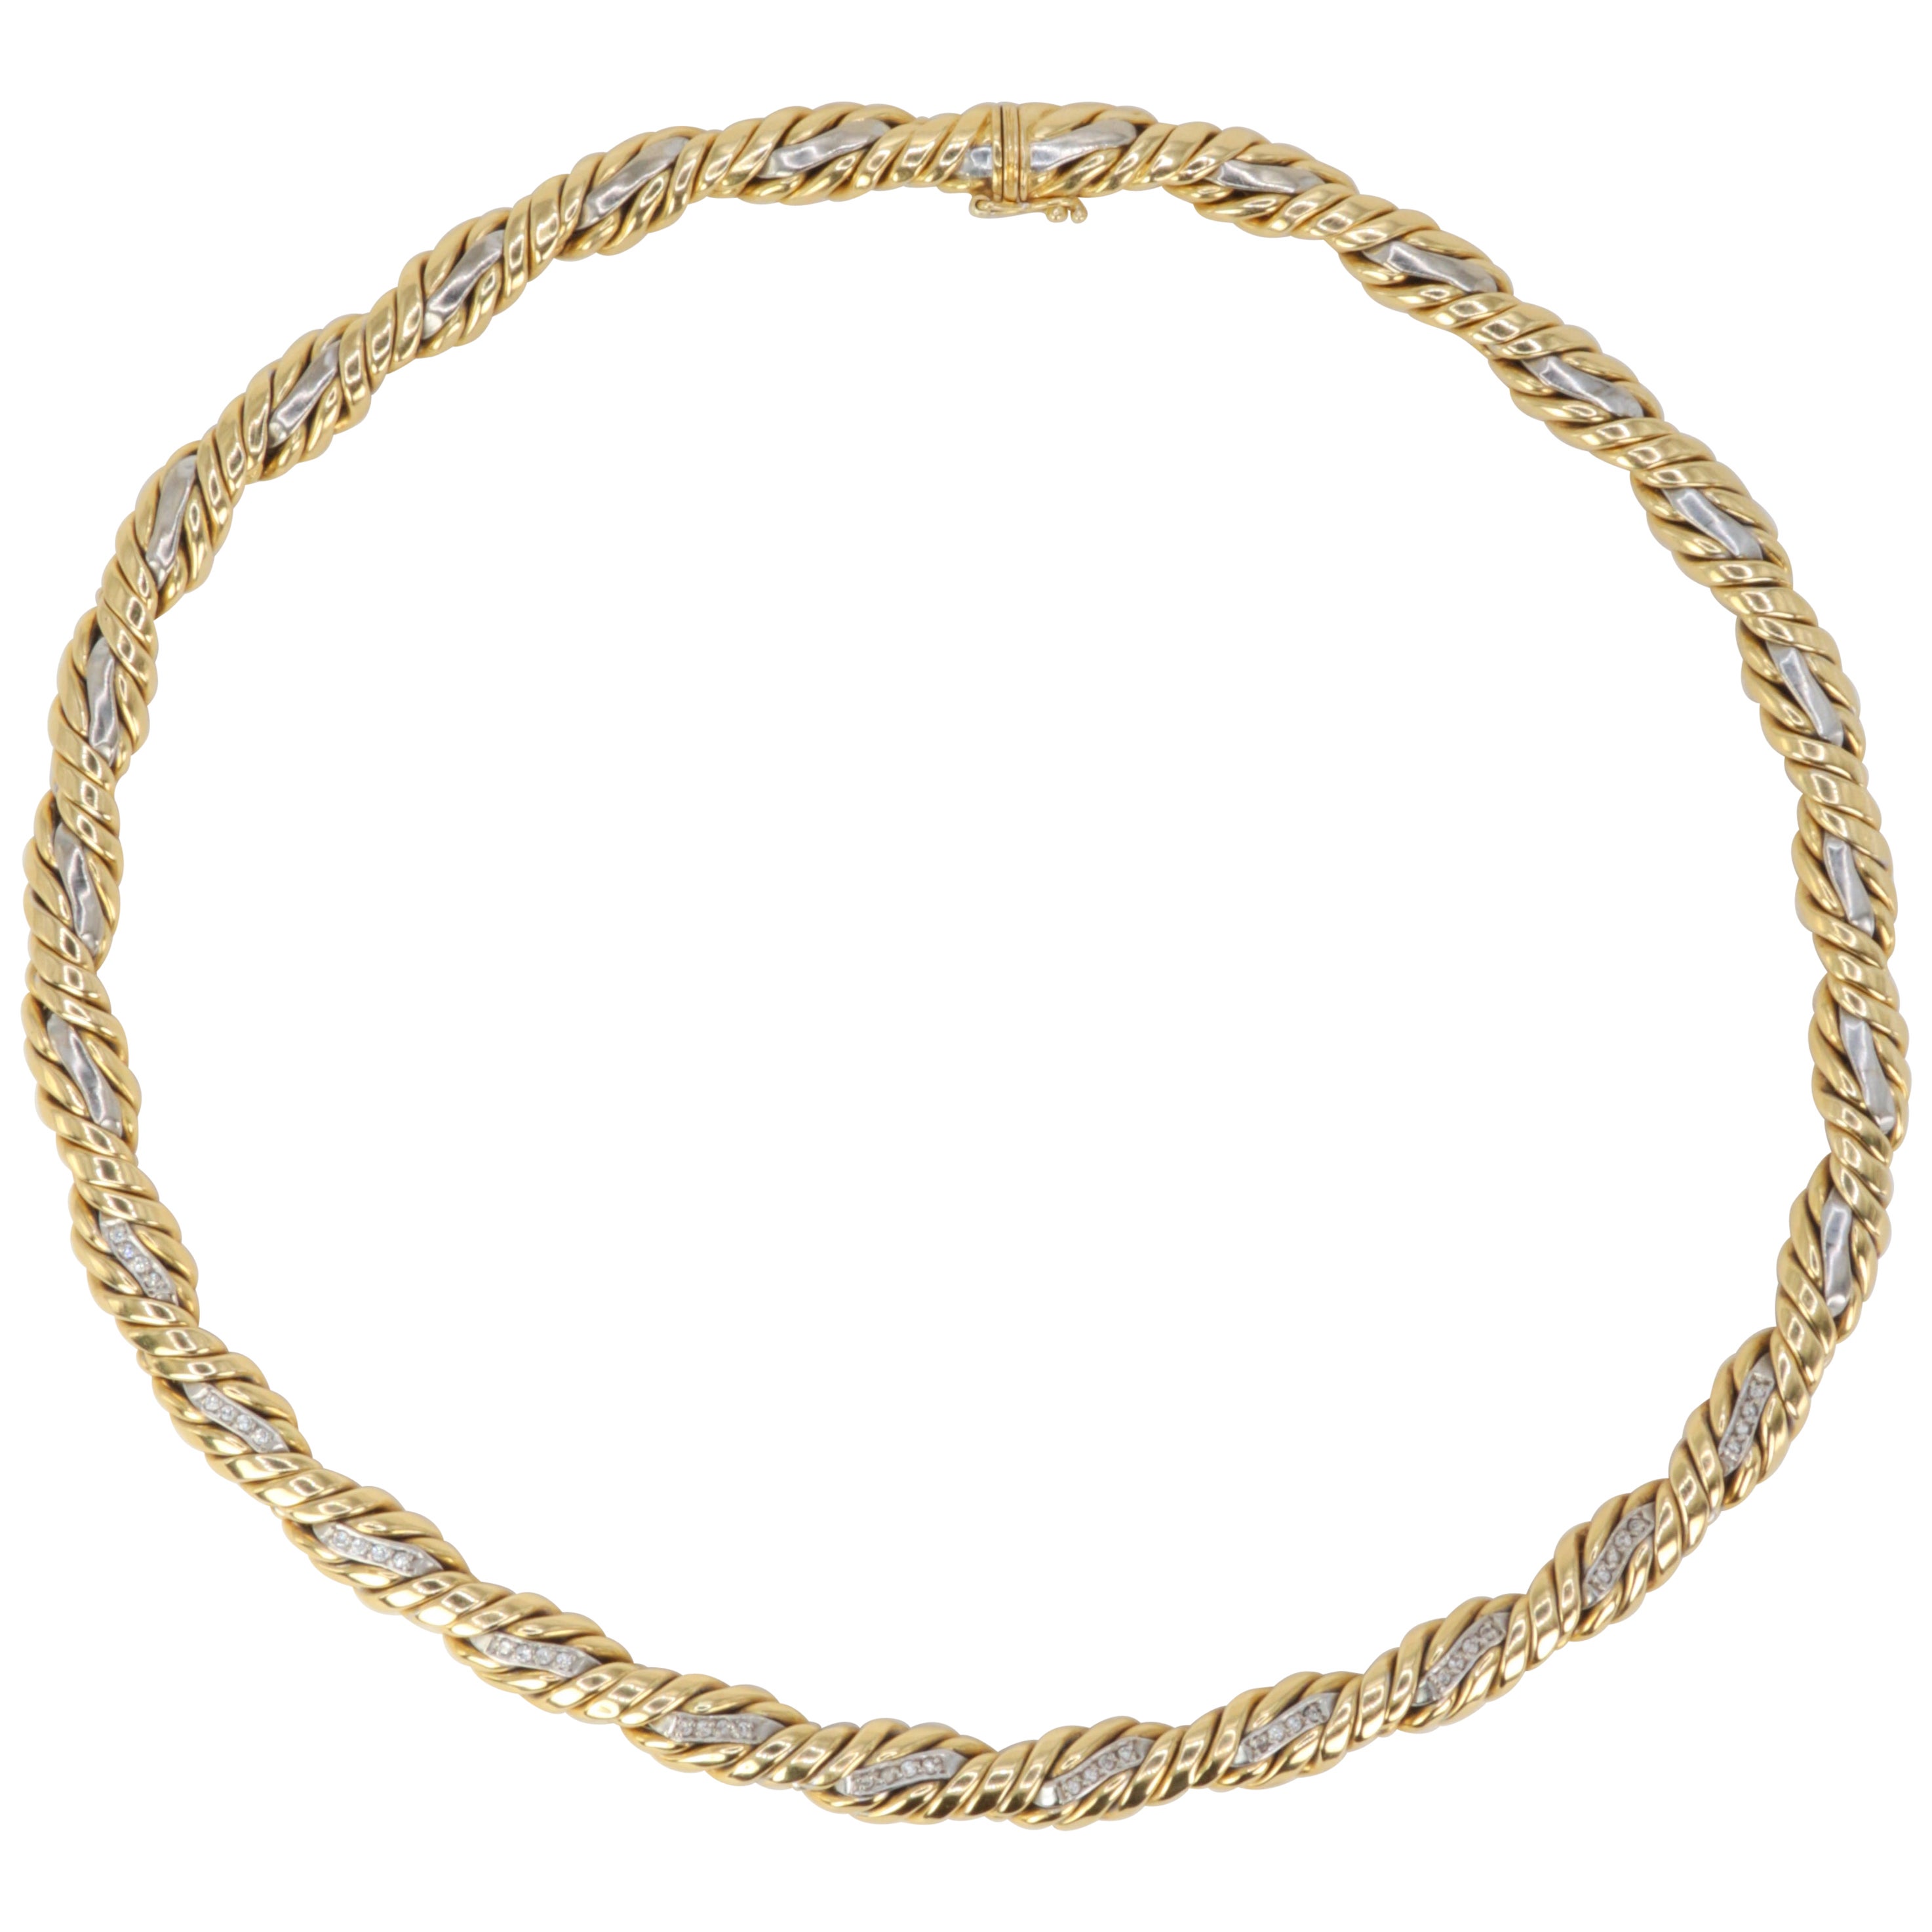 Vintage 2-Tone Gold Rope Necklace Set with Diamonds